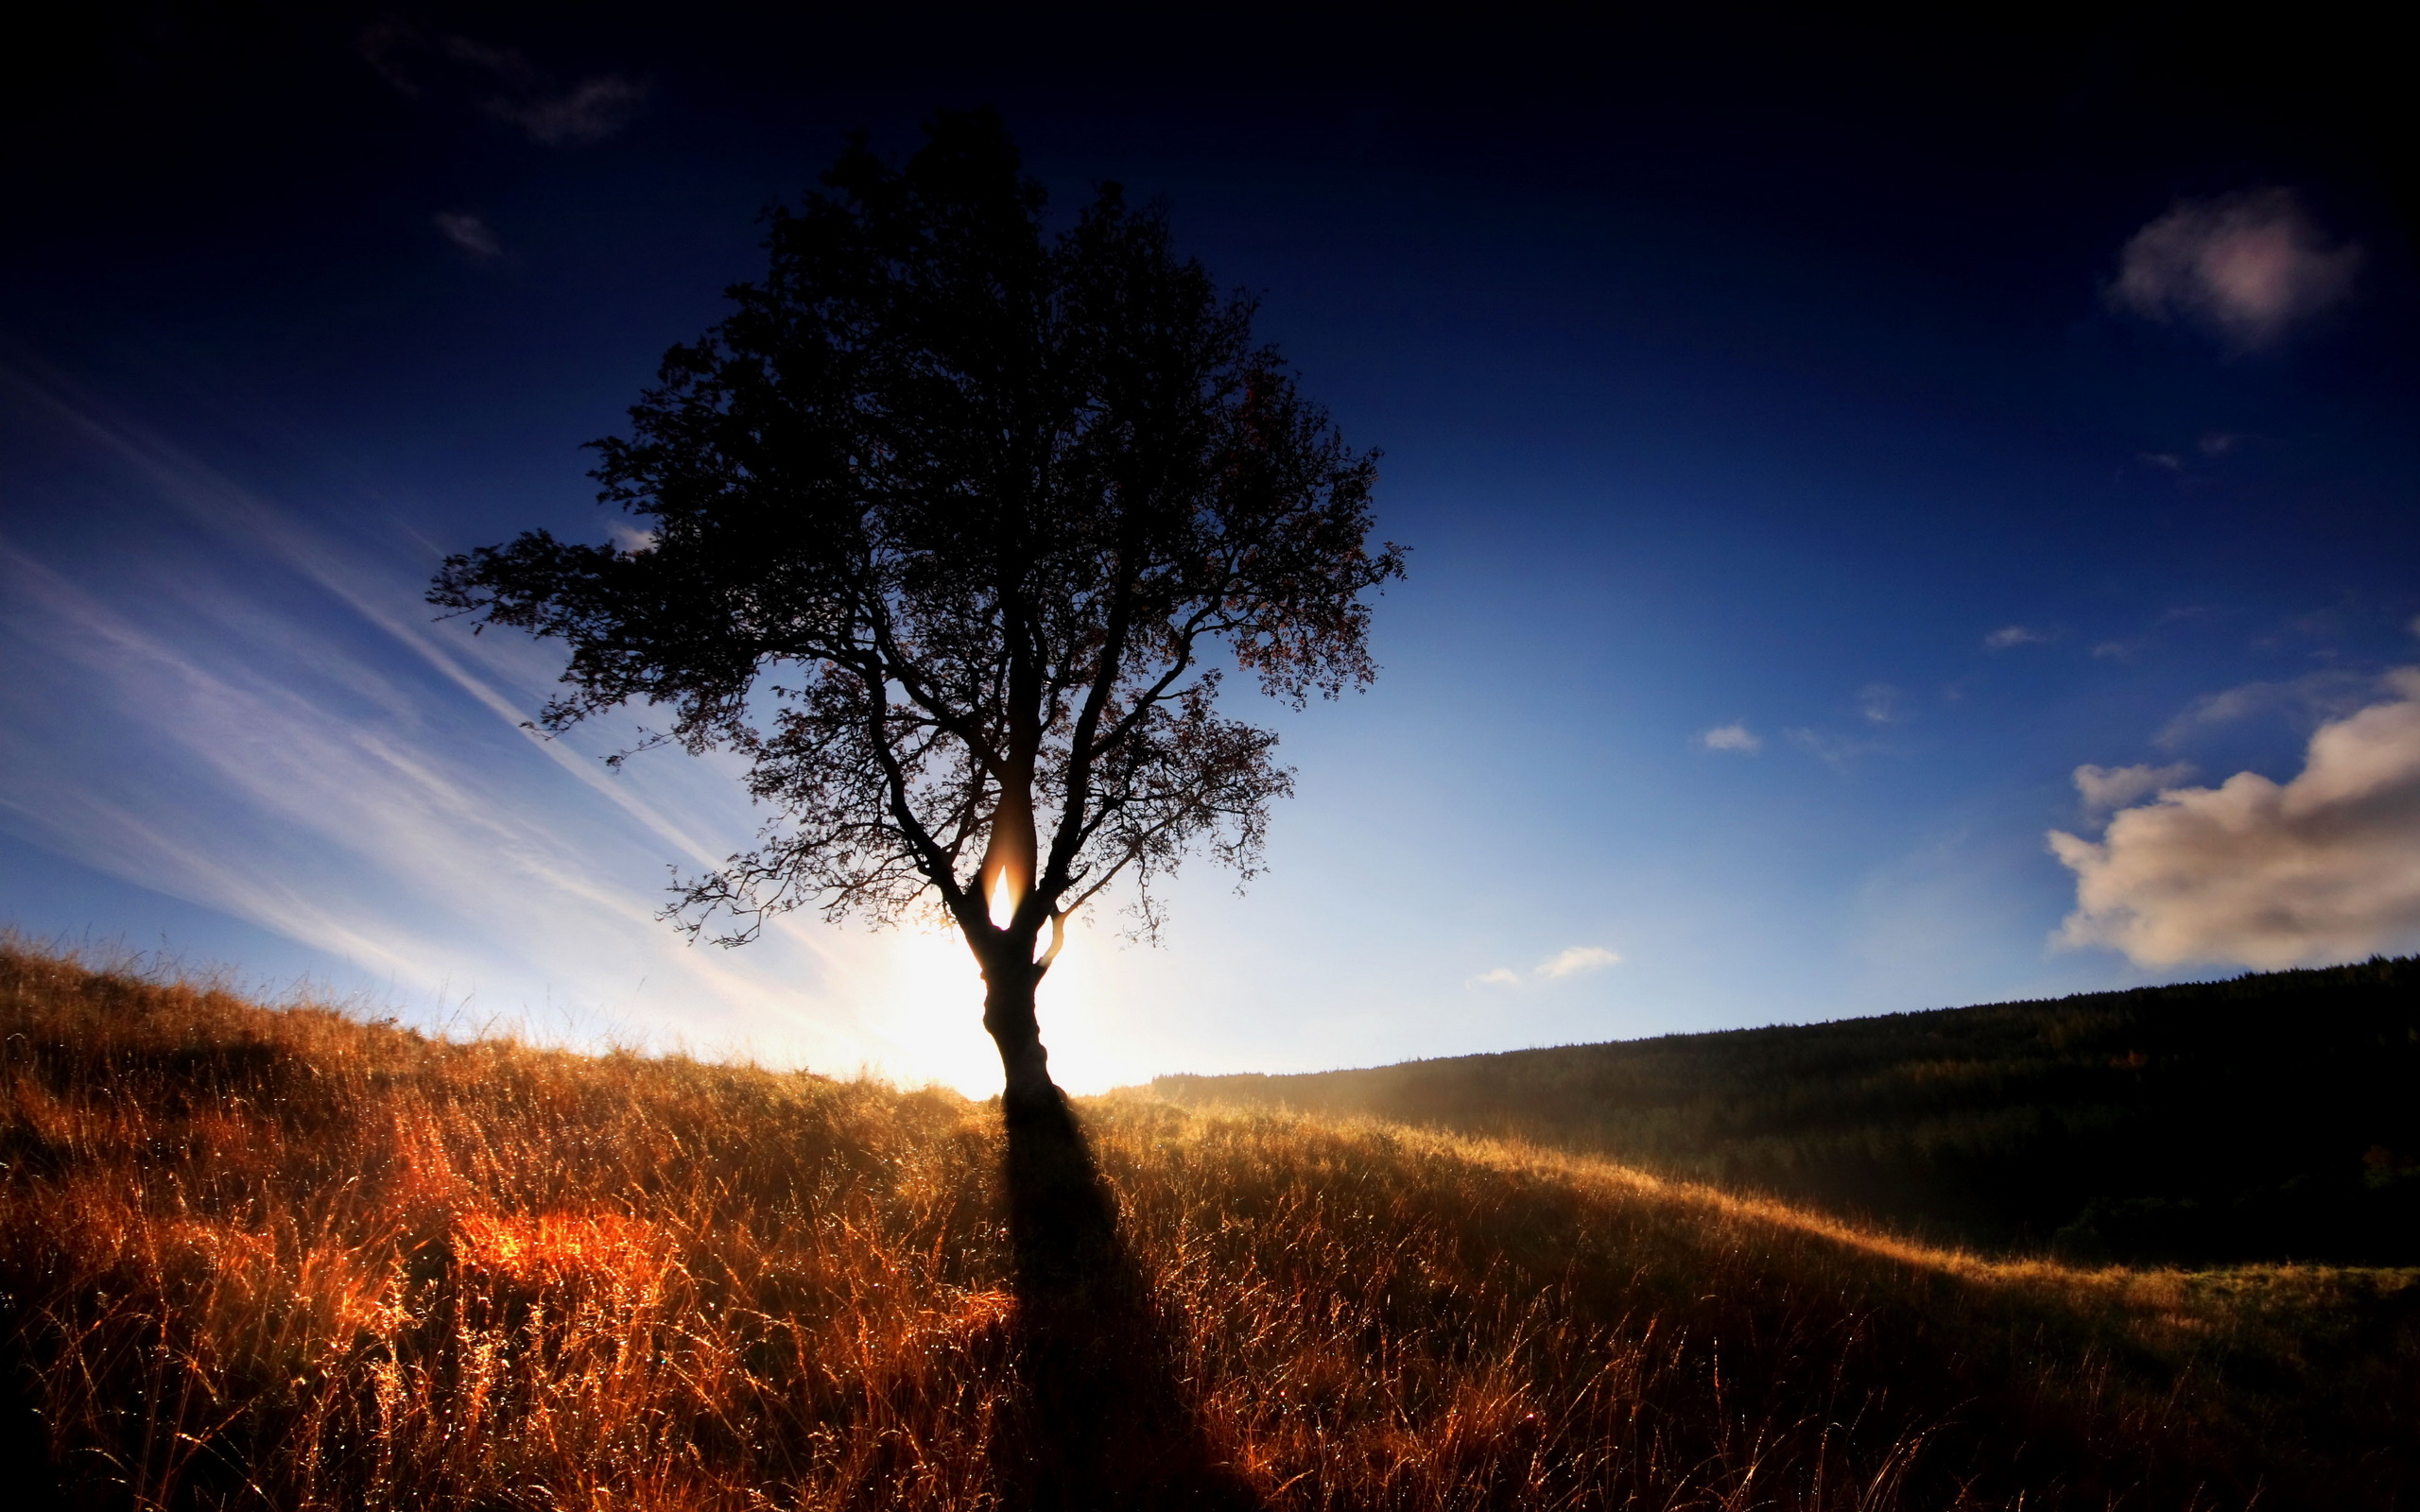 Lonely Tree wallpapers and images - wallpapers, pictures, photos